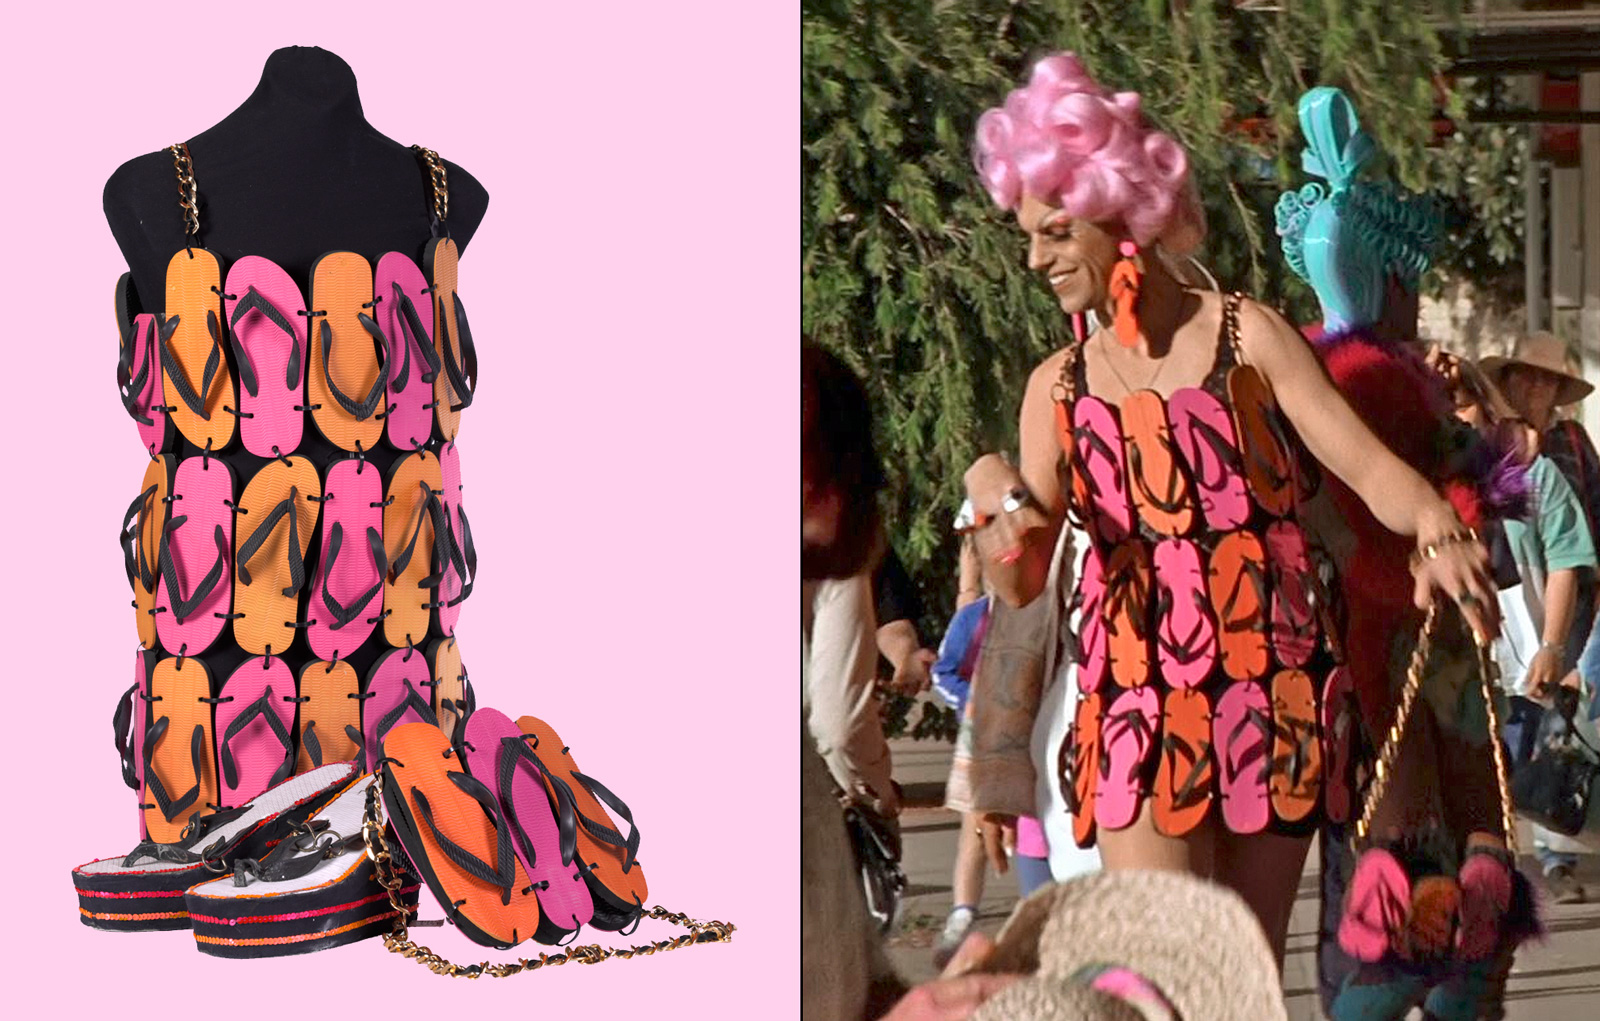 Side by side images. On the left a dress on a mannequin made out of pink and orange rubber thongs. On the right is a still from Priscilla Queen of the Desert showing Hugo Weaving wearing the dress with a pink wig in a crowded street.